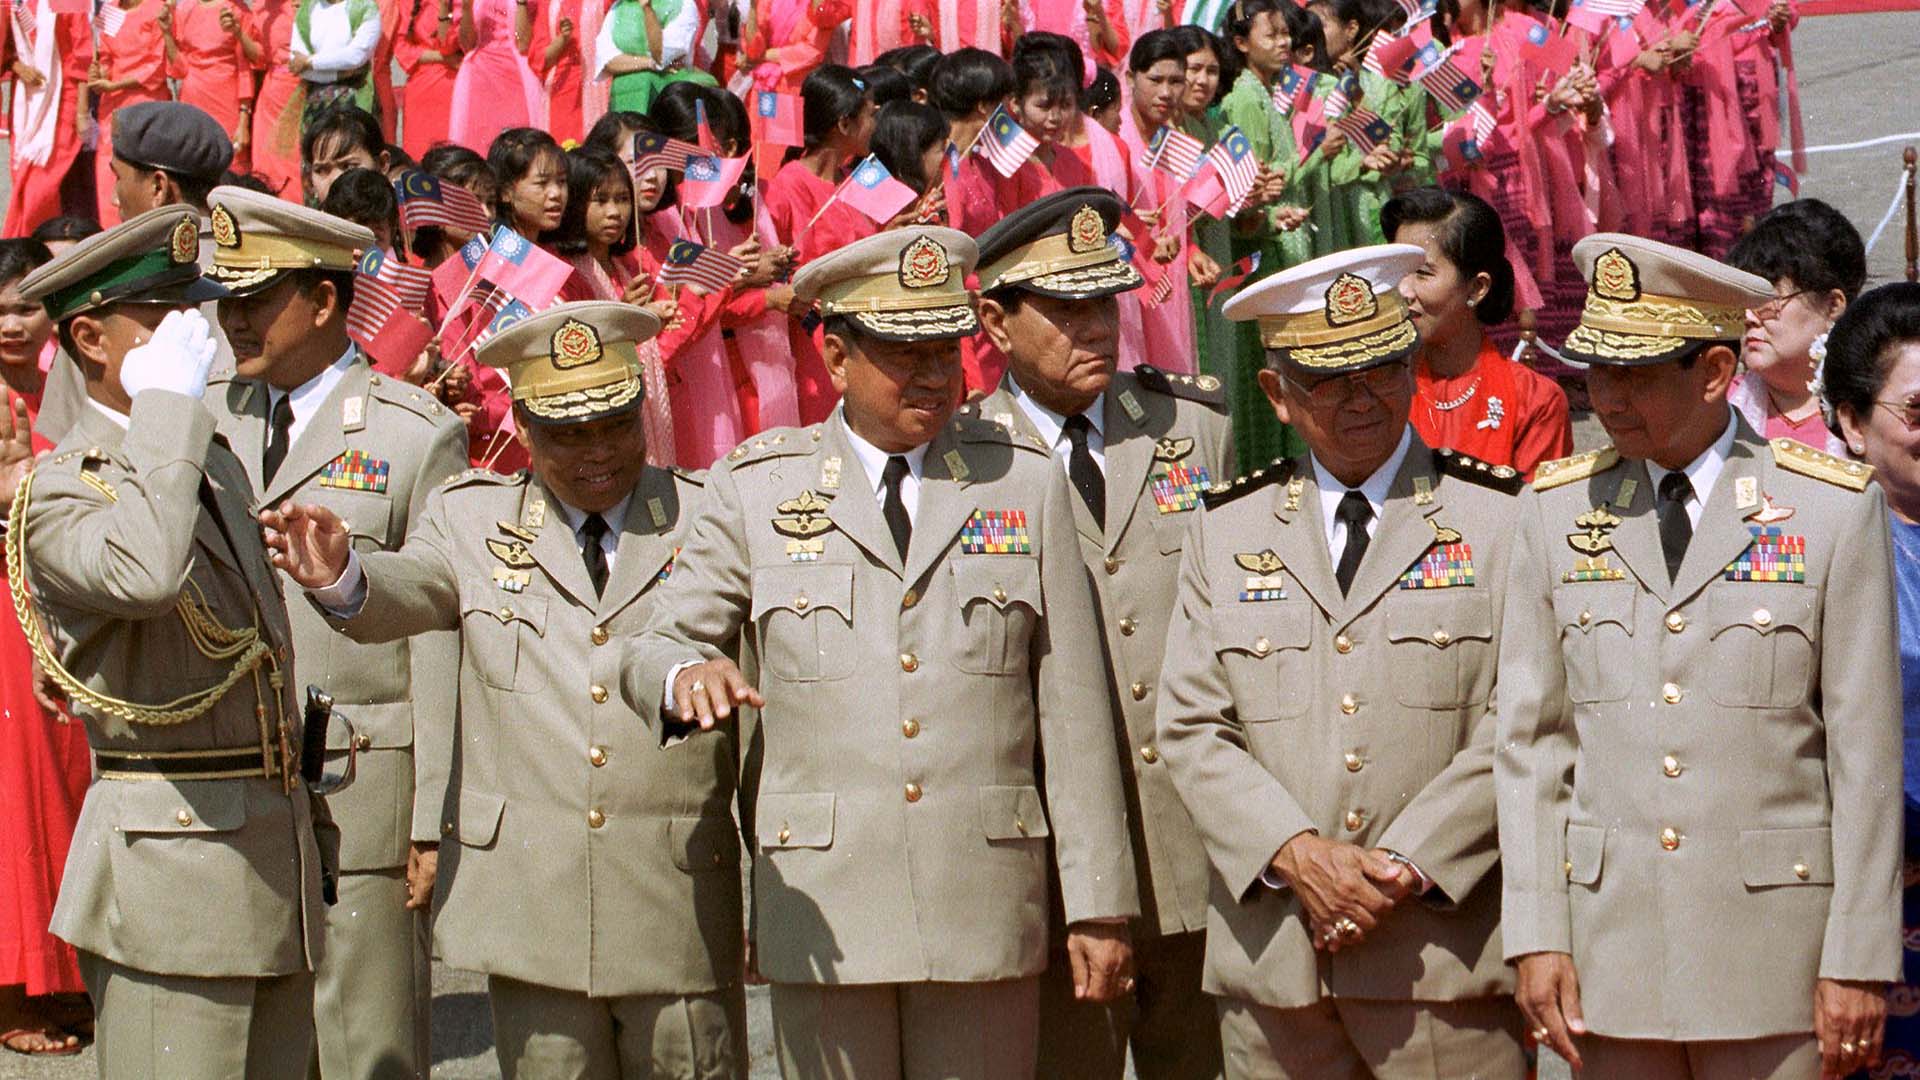 Its Time For Myanmars Neighbors To Sideline The Military Junta